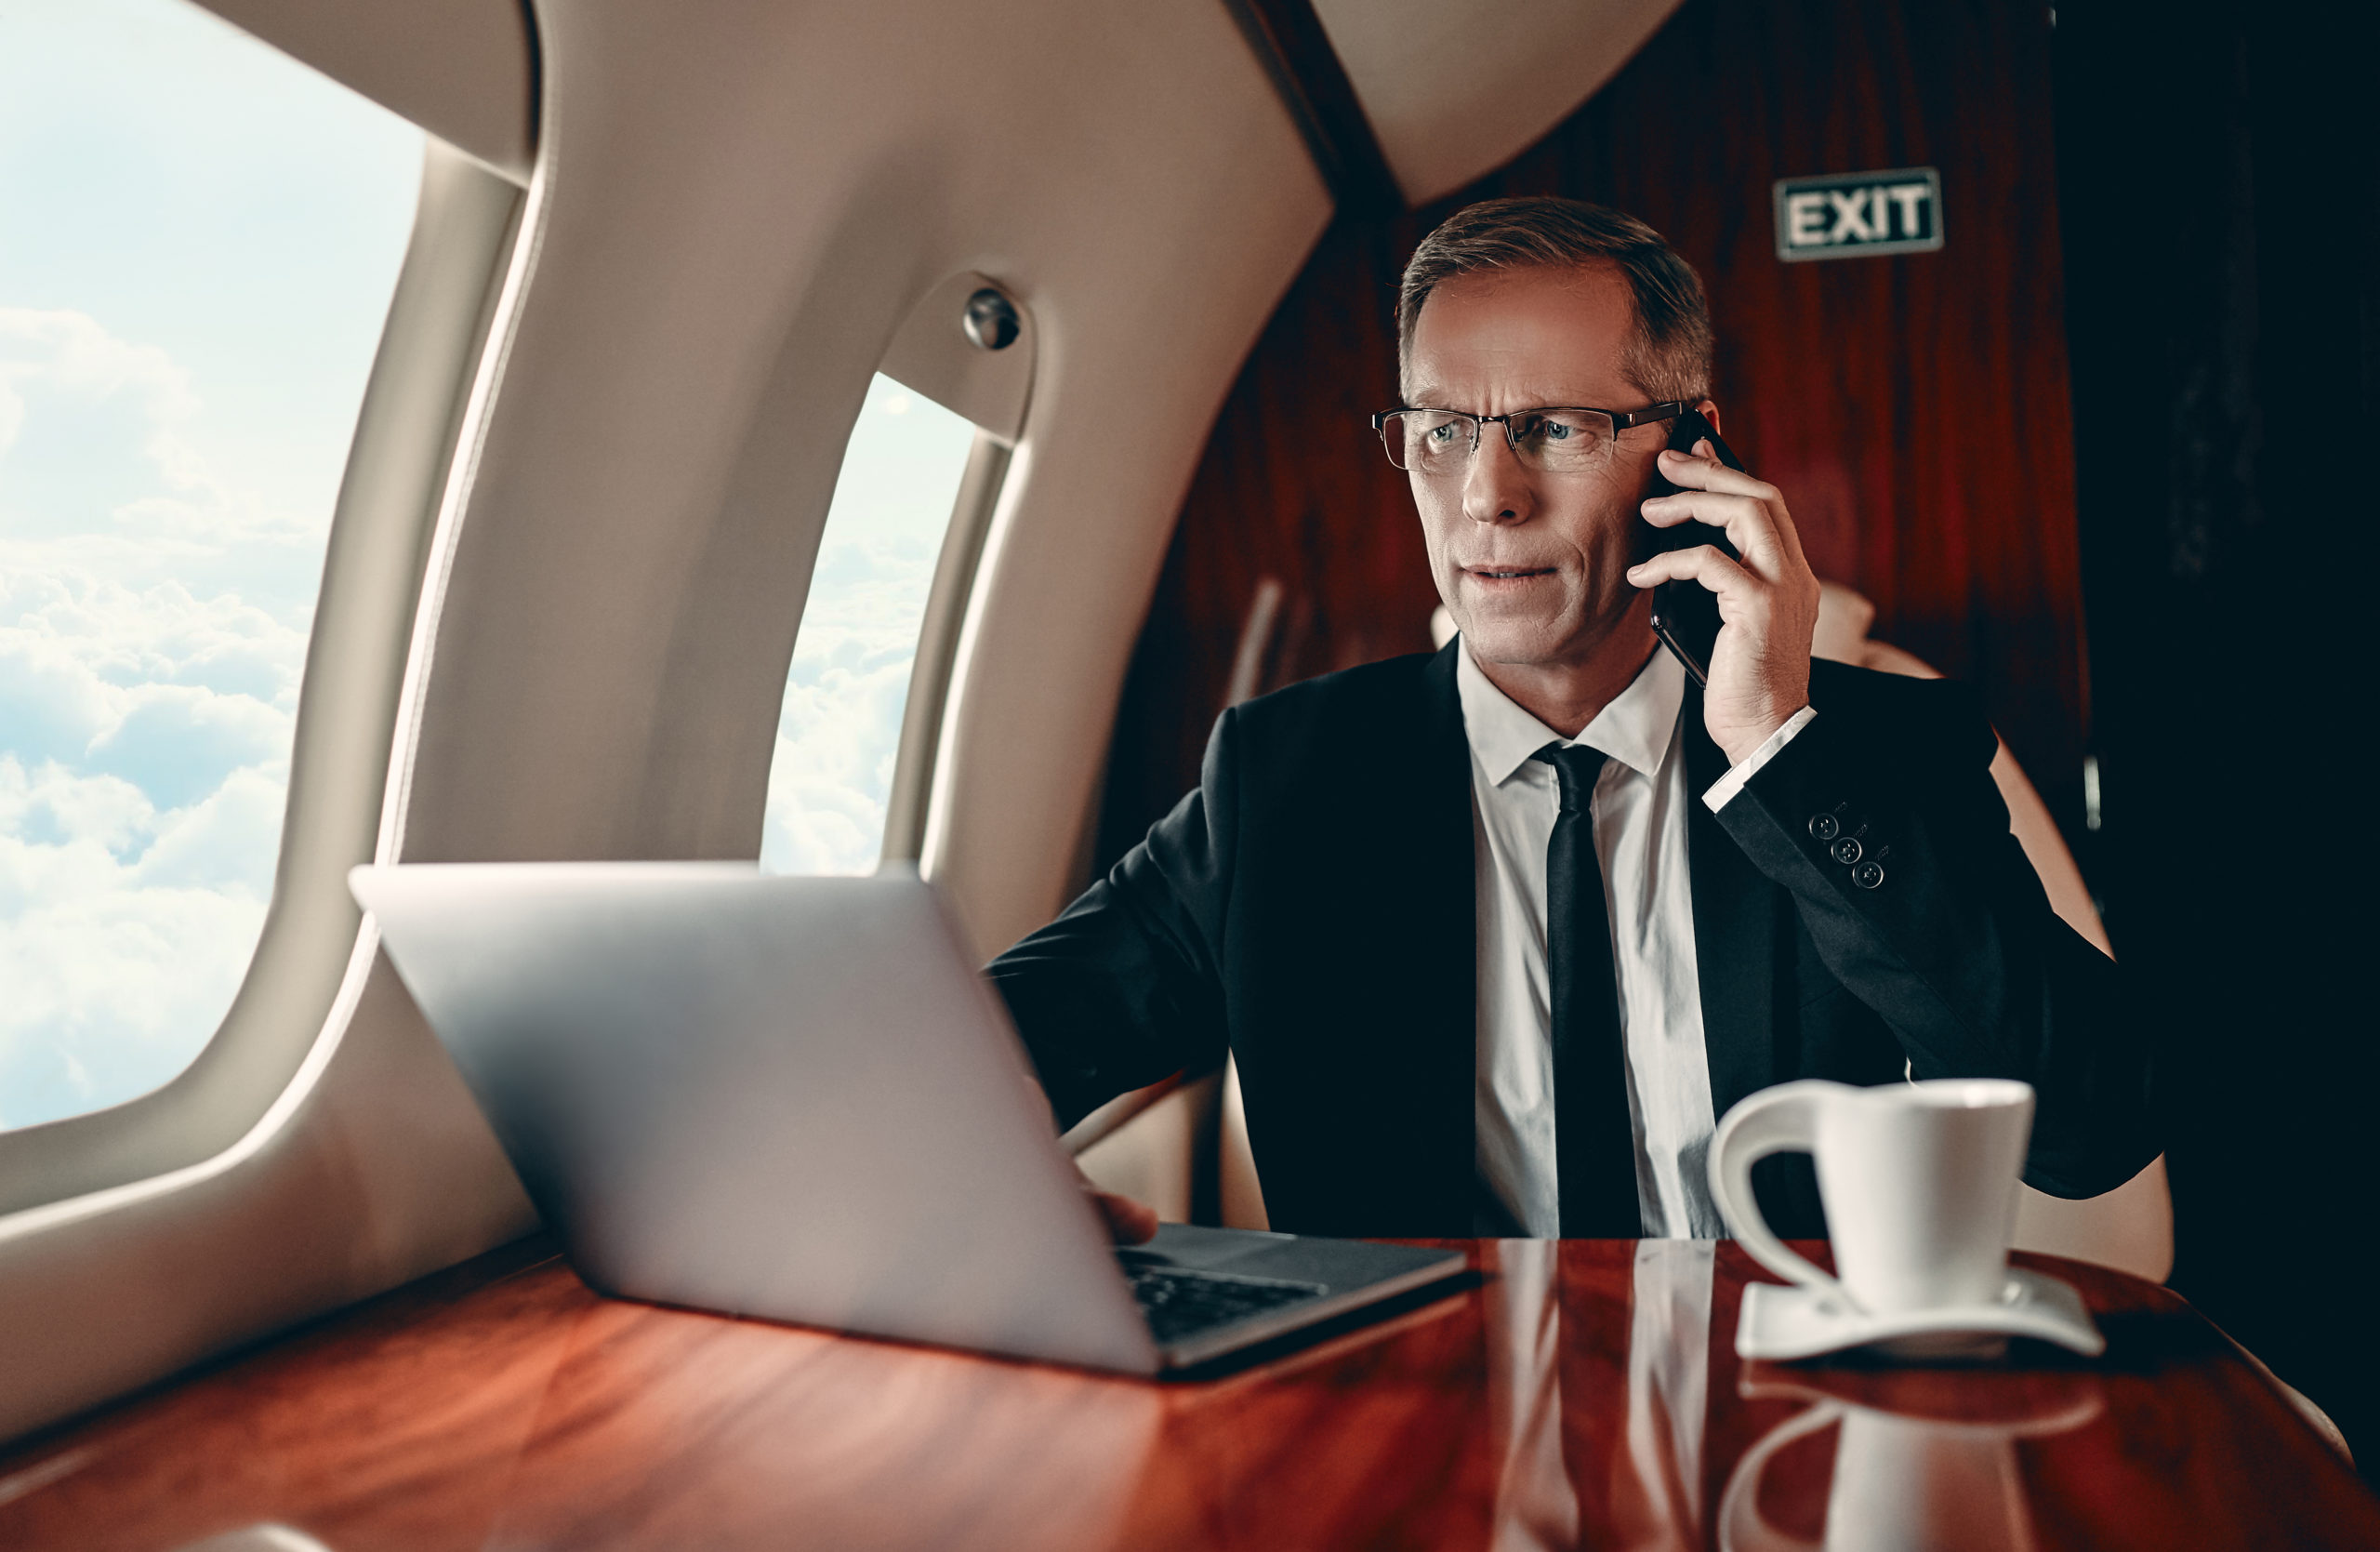 Planning for your next business jet purchase